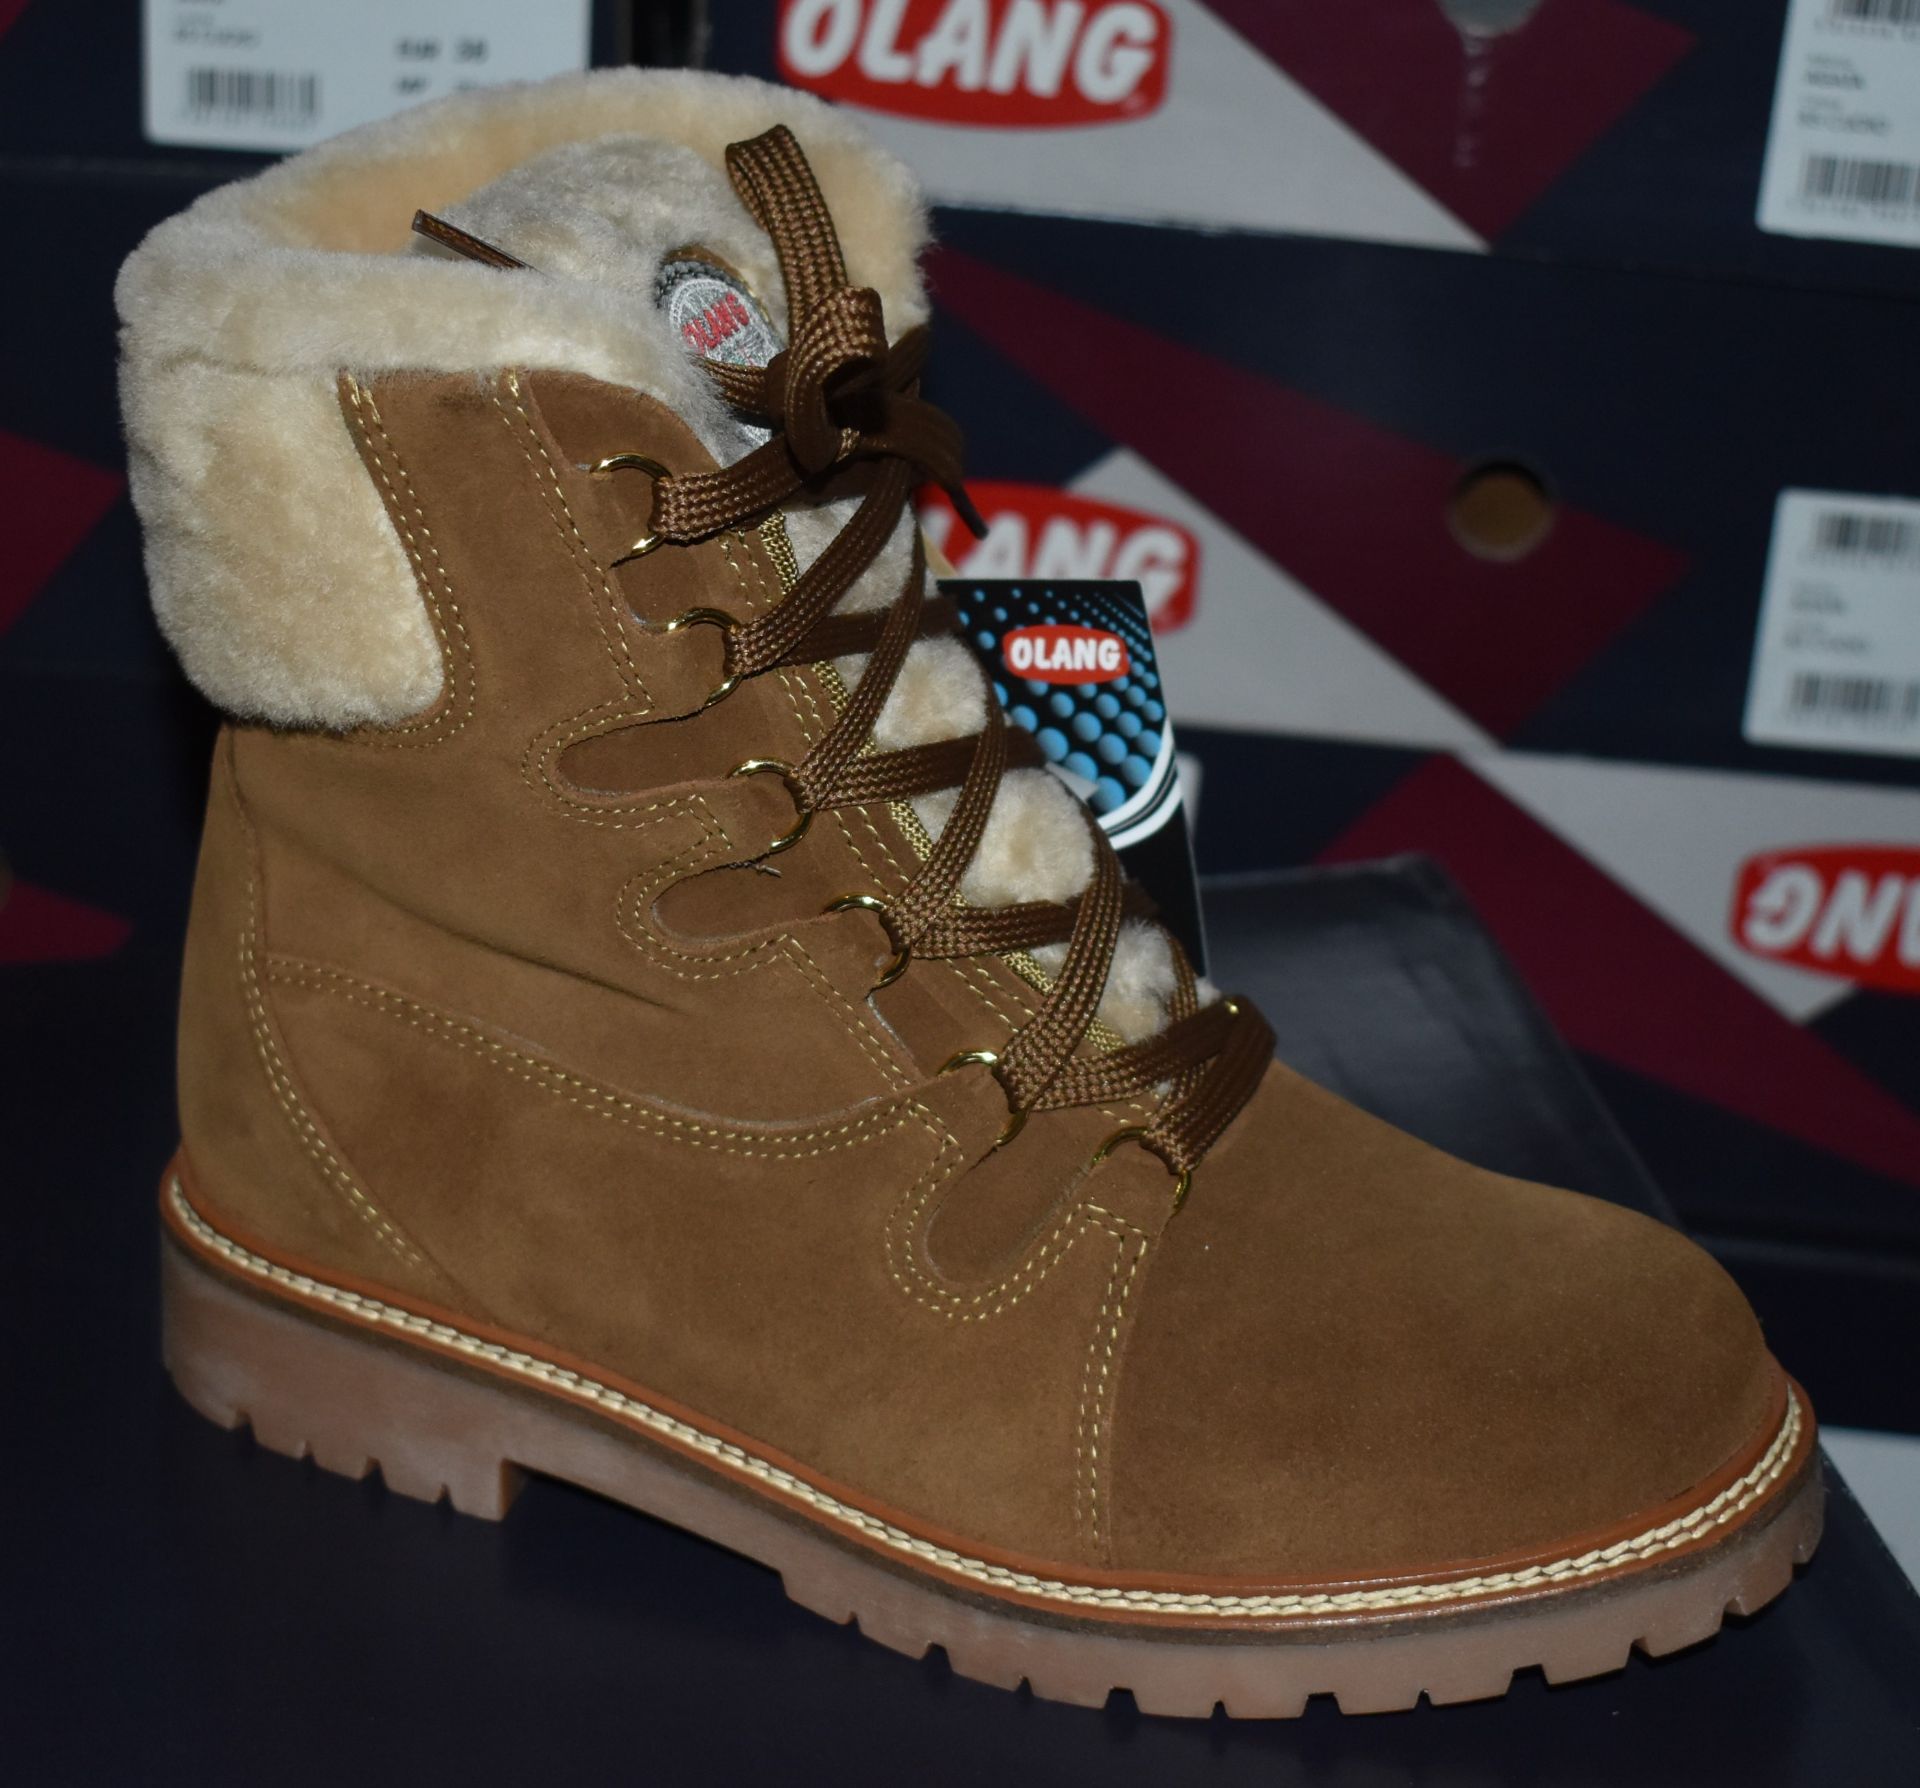 1 x Pair of Designer Olang Meribel 85 CUOIO Women's Winter Boots - Euro Size 36 - Brand New Boxed - Image 8 of 8